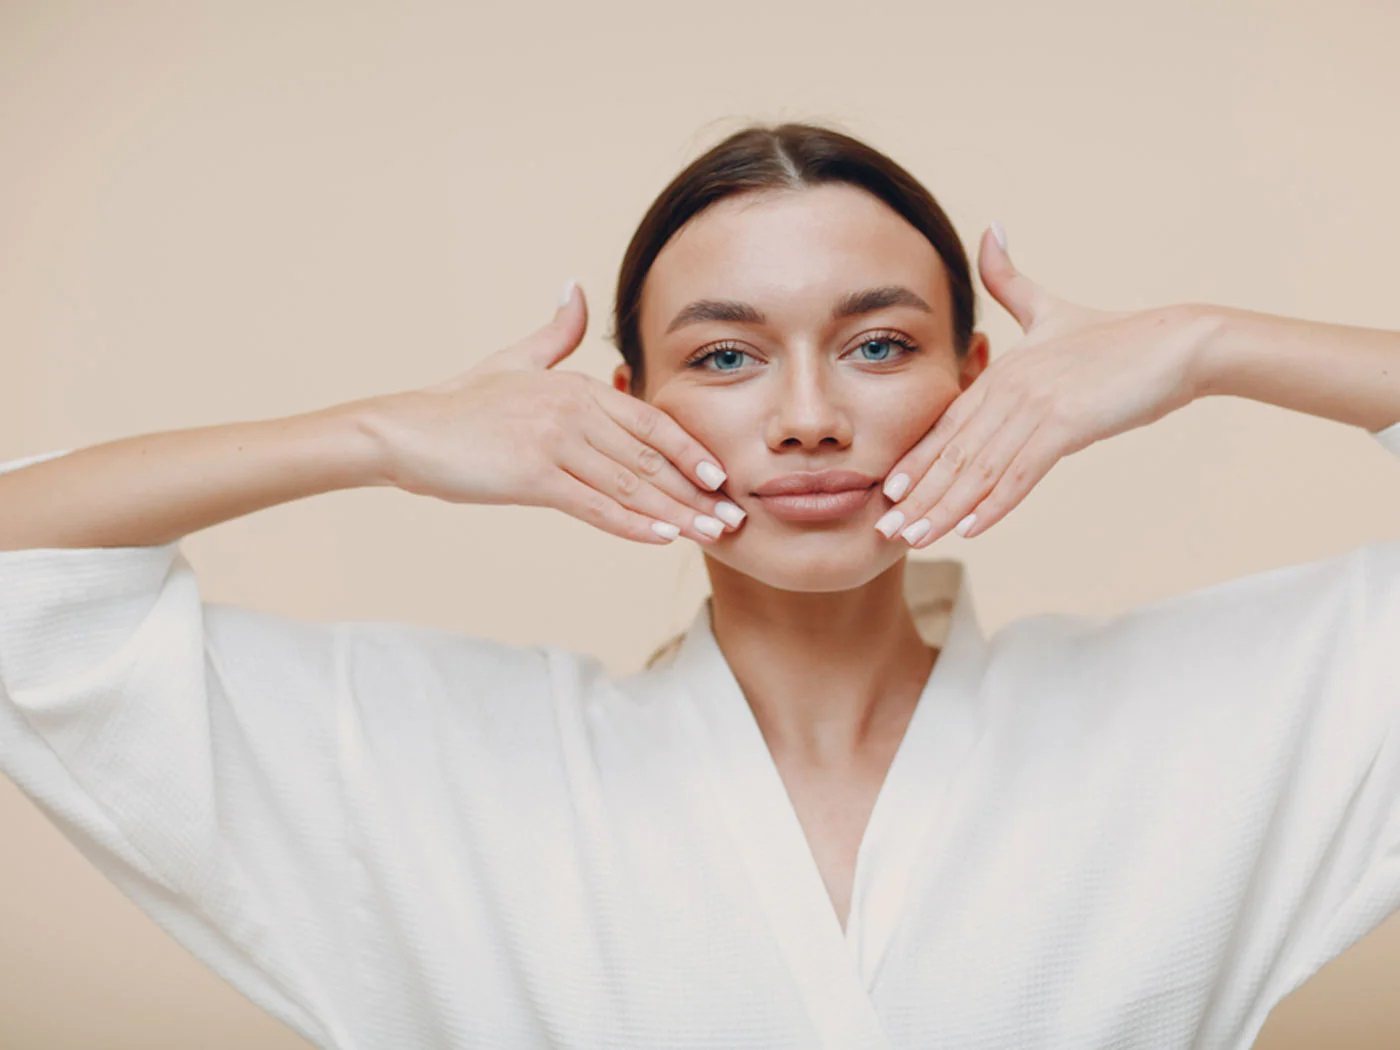 Gwyneth Paltrow, Meghan Markle and Madonna have joined millions of social media users getting into face yoga as part of a “skinimalism” trend. Photo: Handout